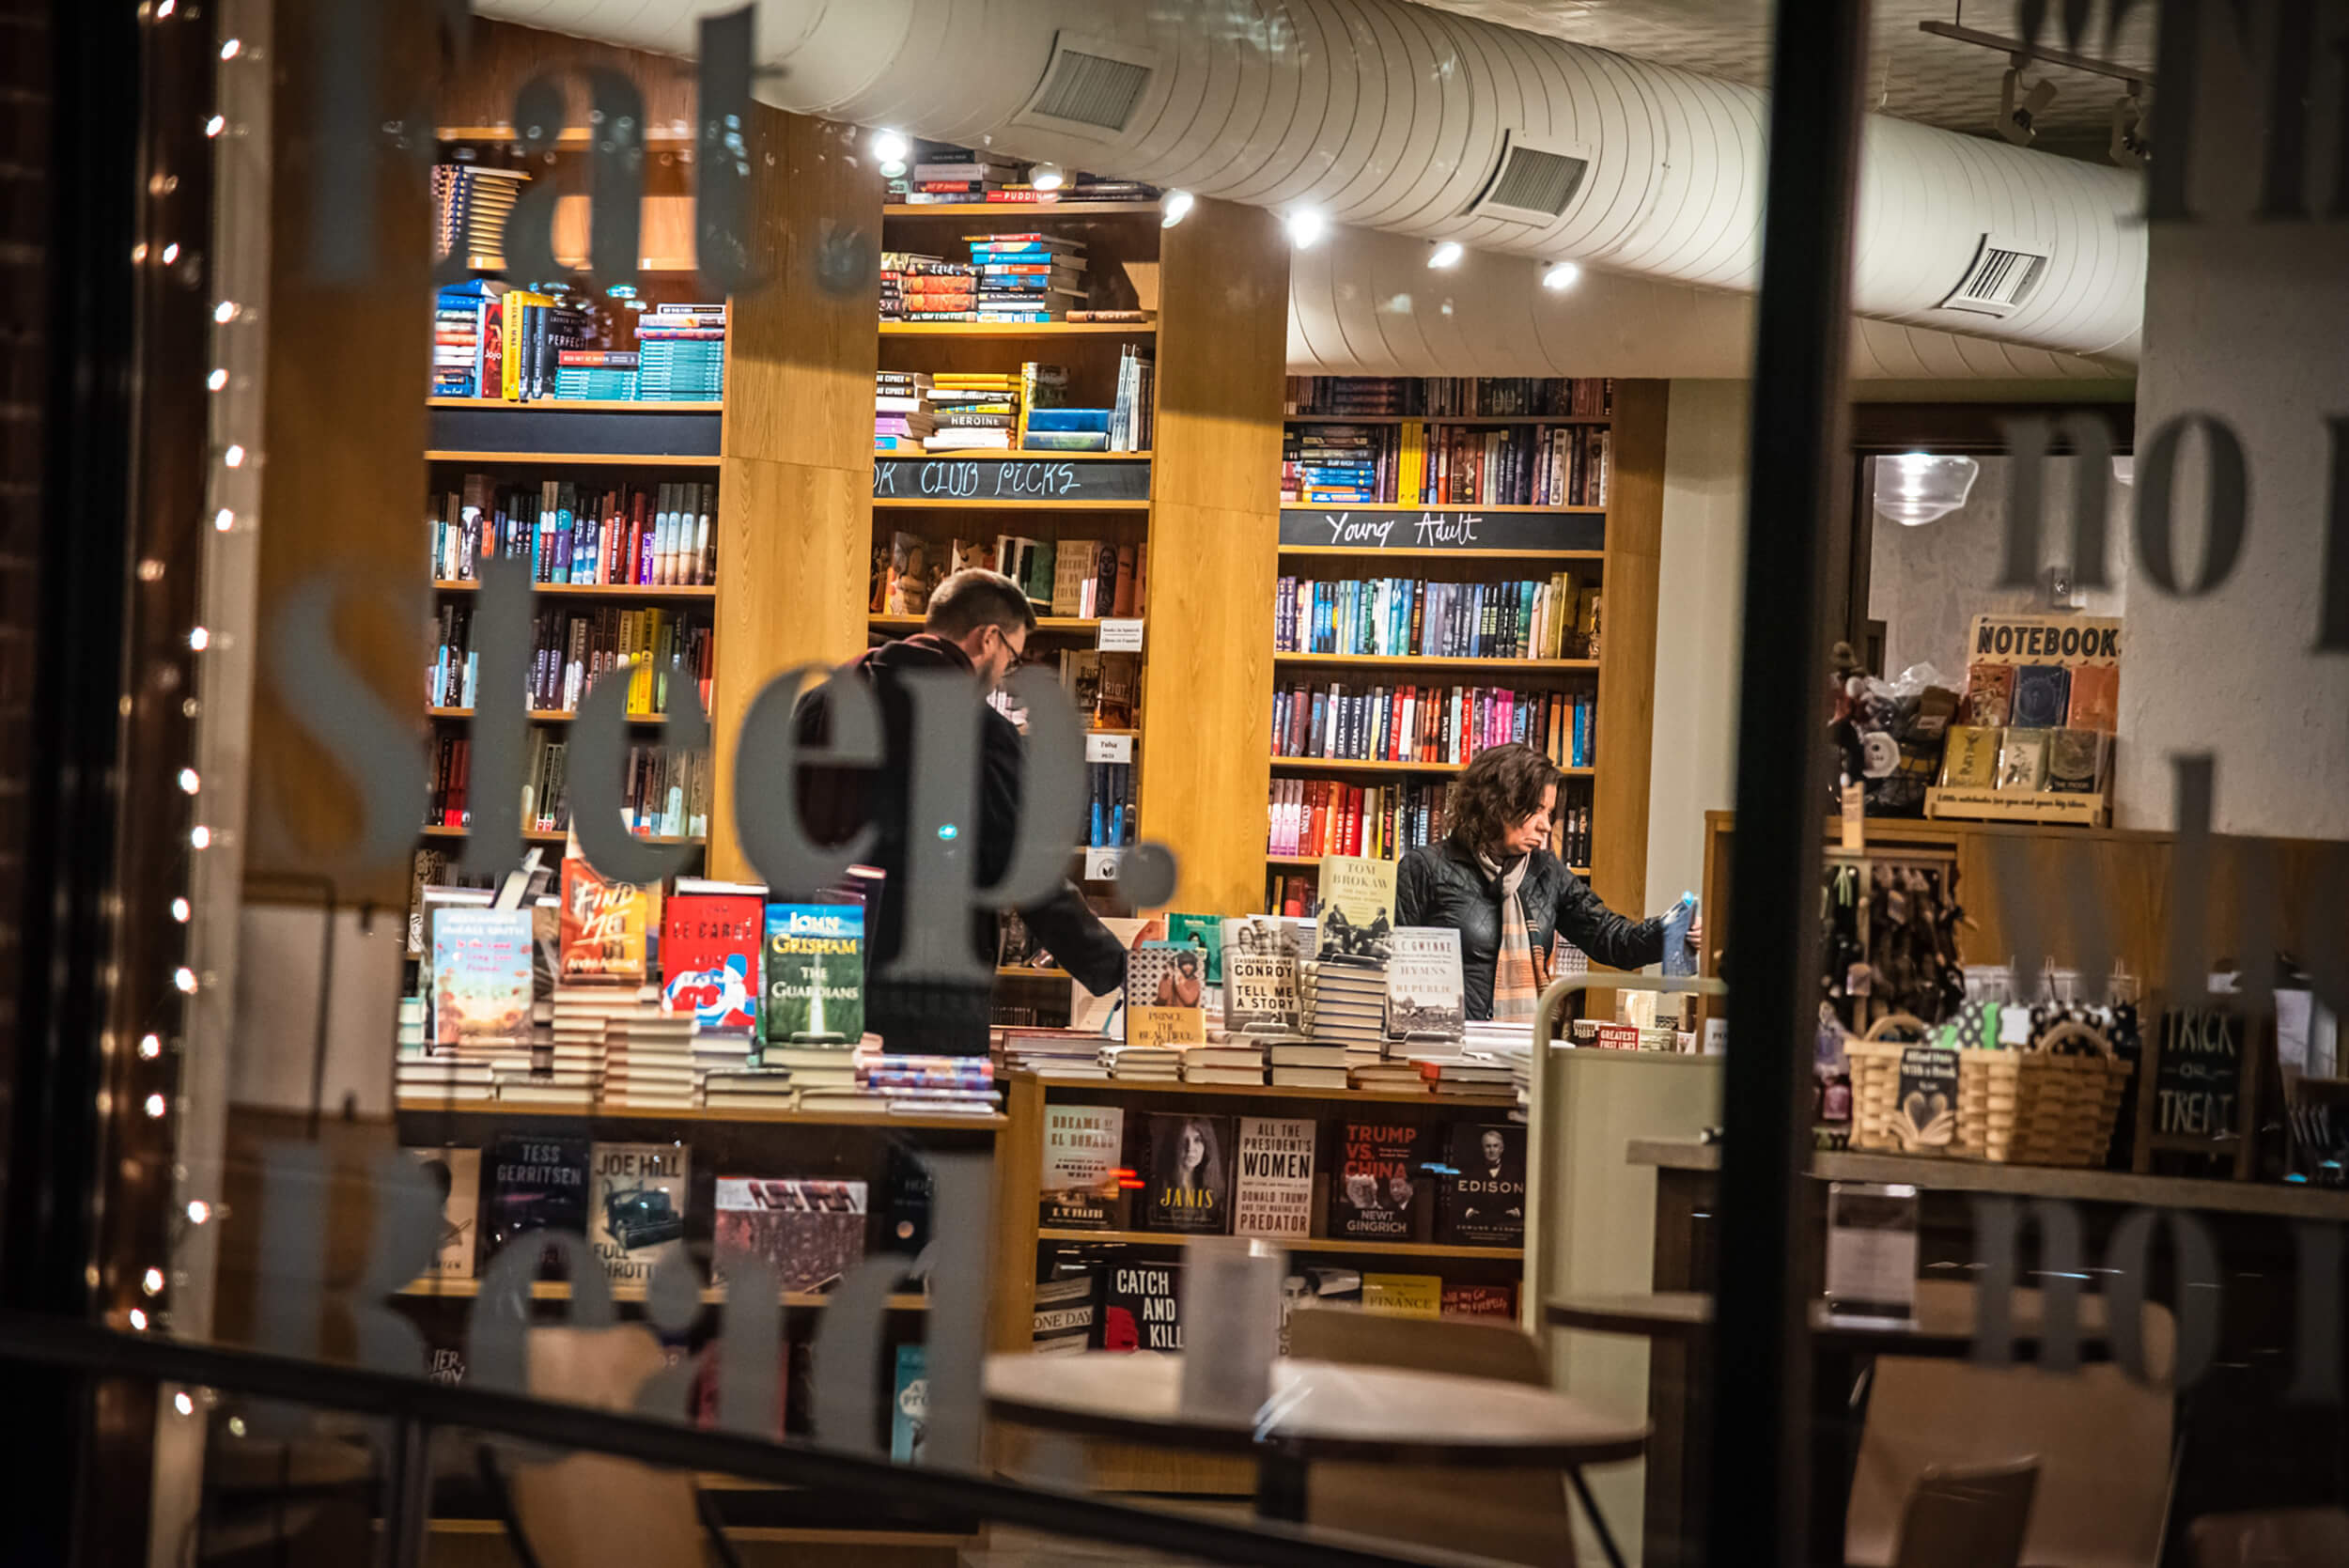 People shop at a bookstore in the Tulsa Arts District .